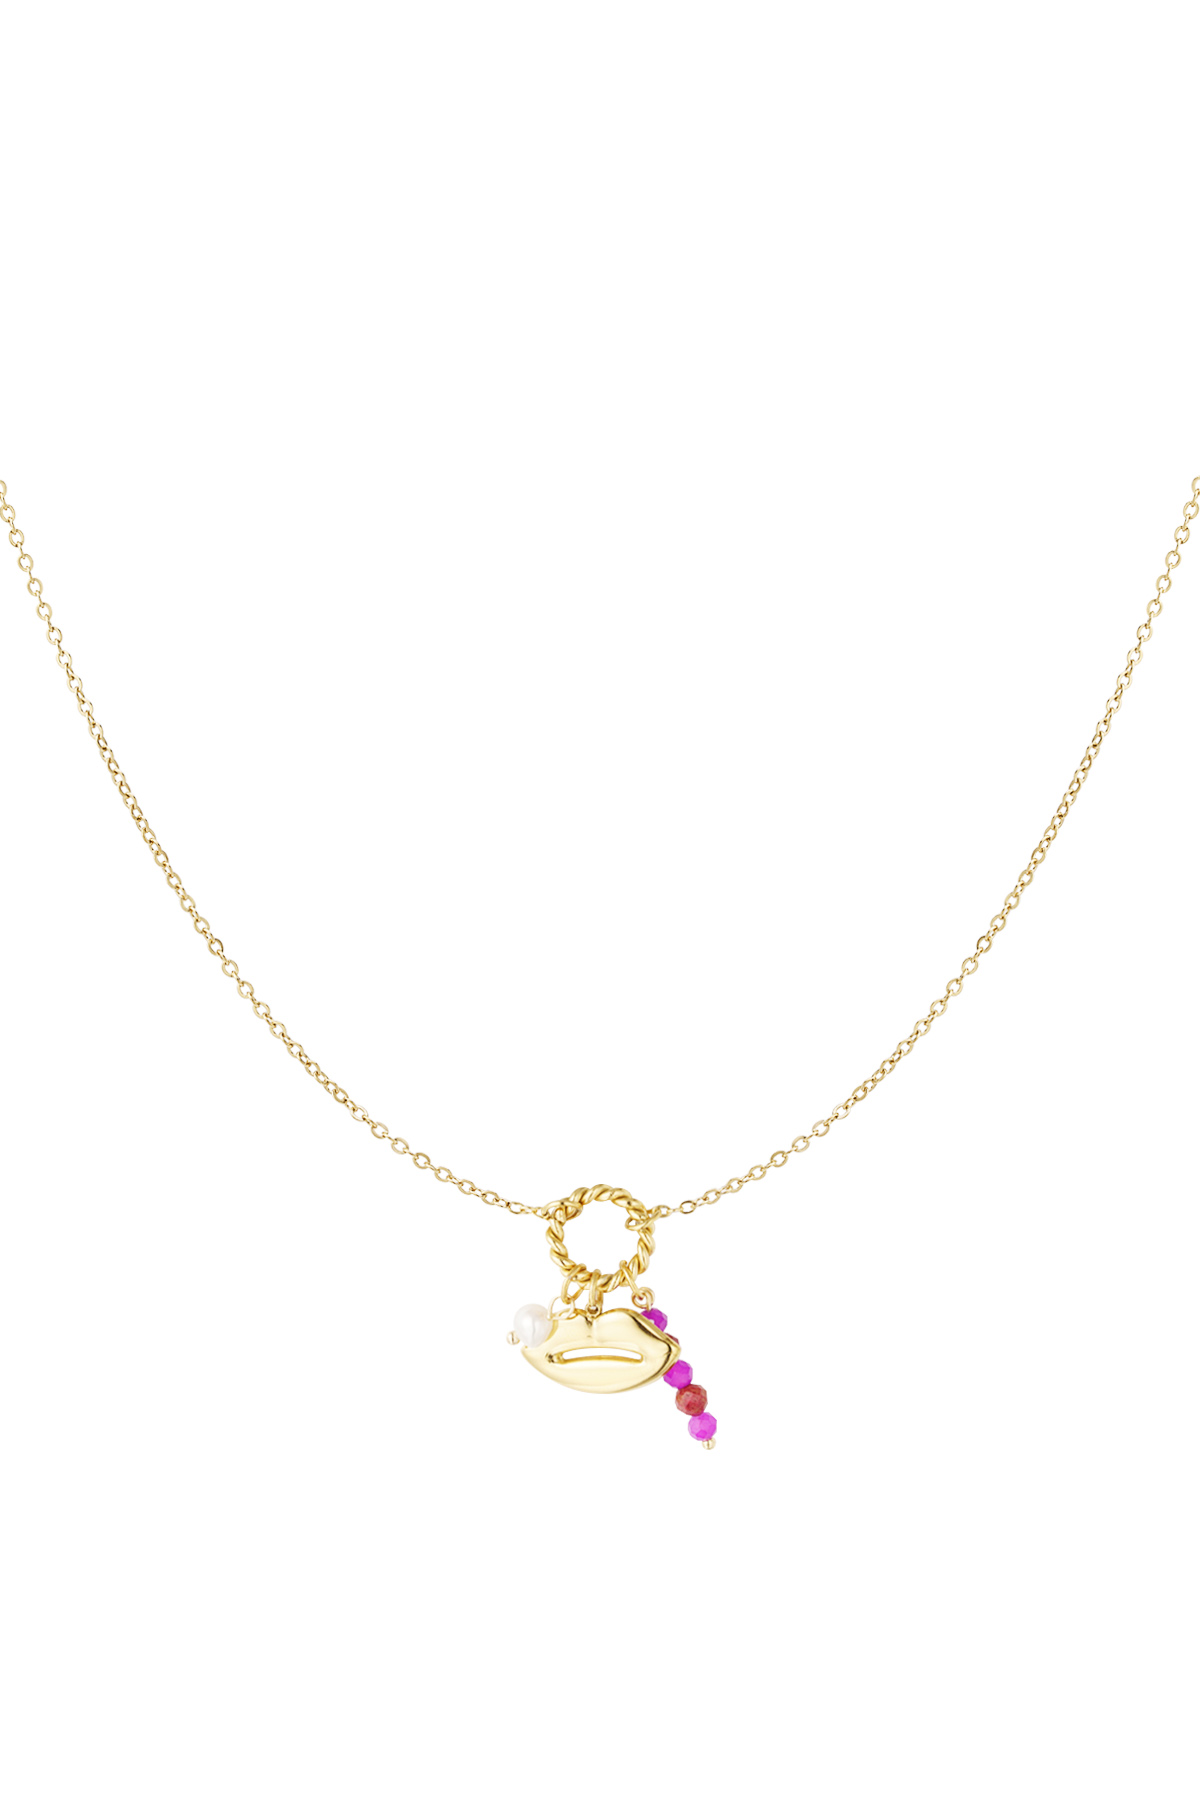 Necklace mouth with beads - gold/pink 